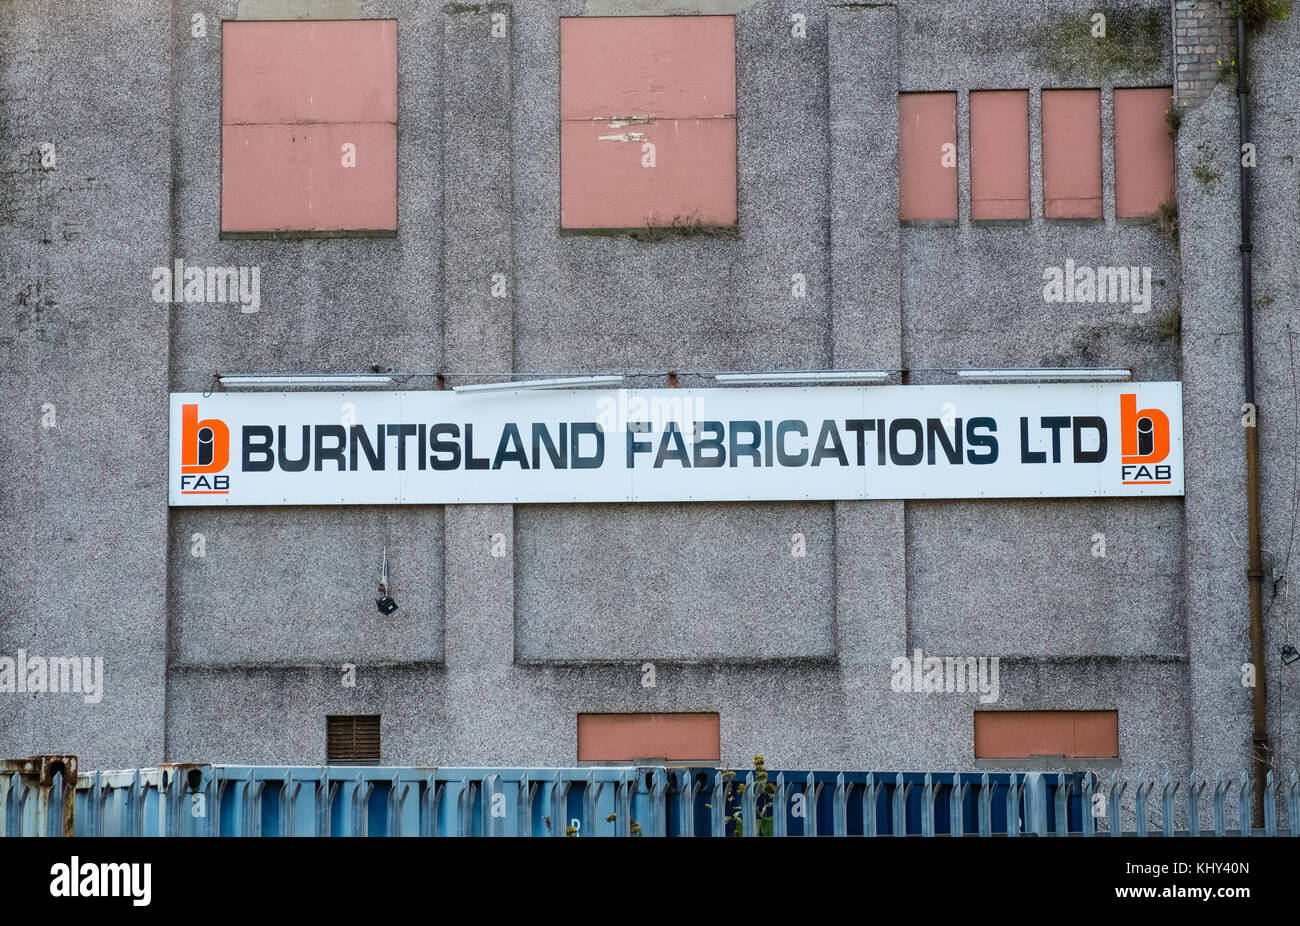 View of Burntisland Fabrications yard at Burntisland in Fife , Scotland, UK. They fabricate platforms and modules for the offshore oil, gas and renewa Stock Photo